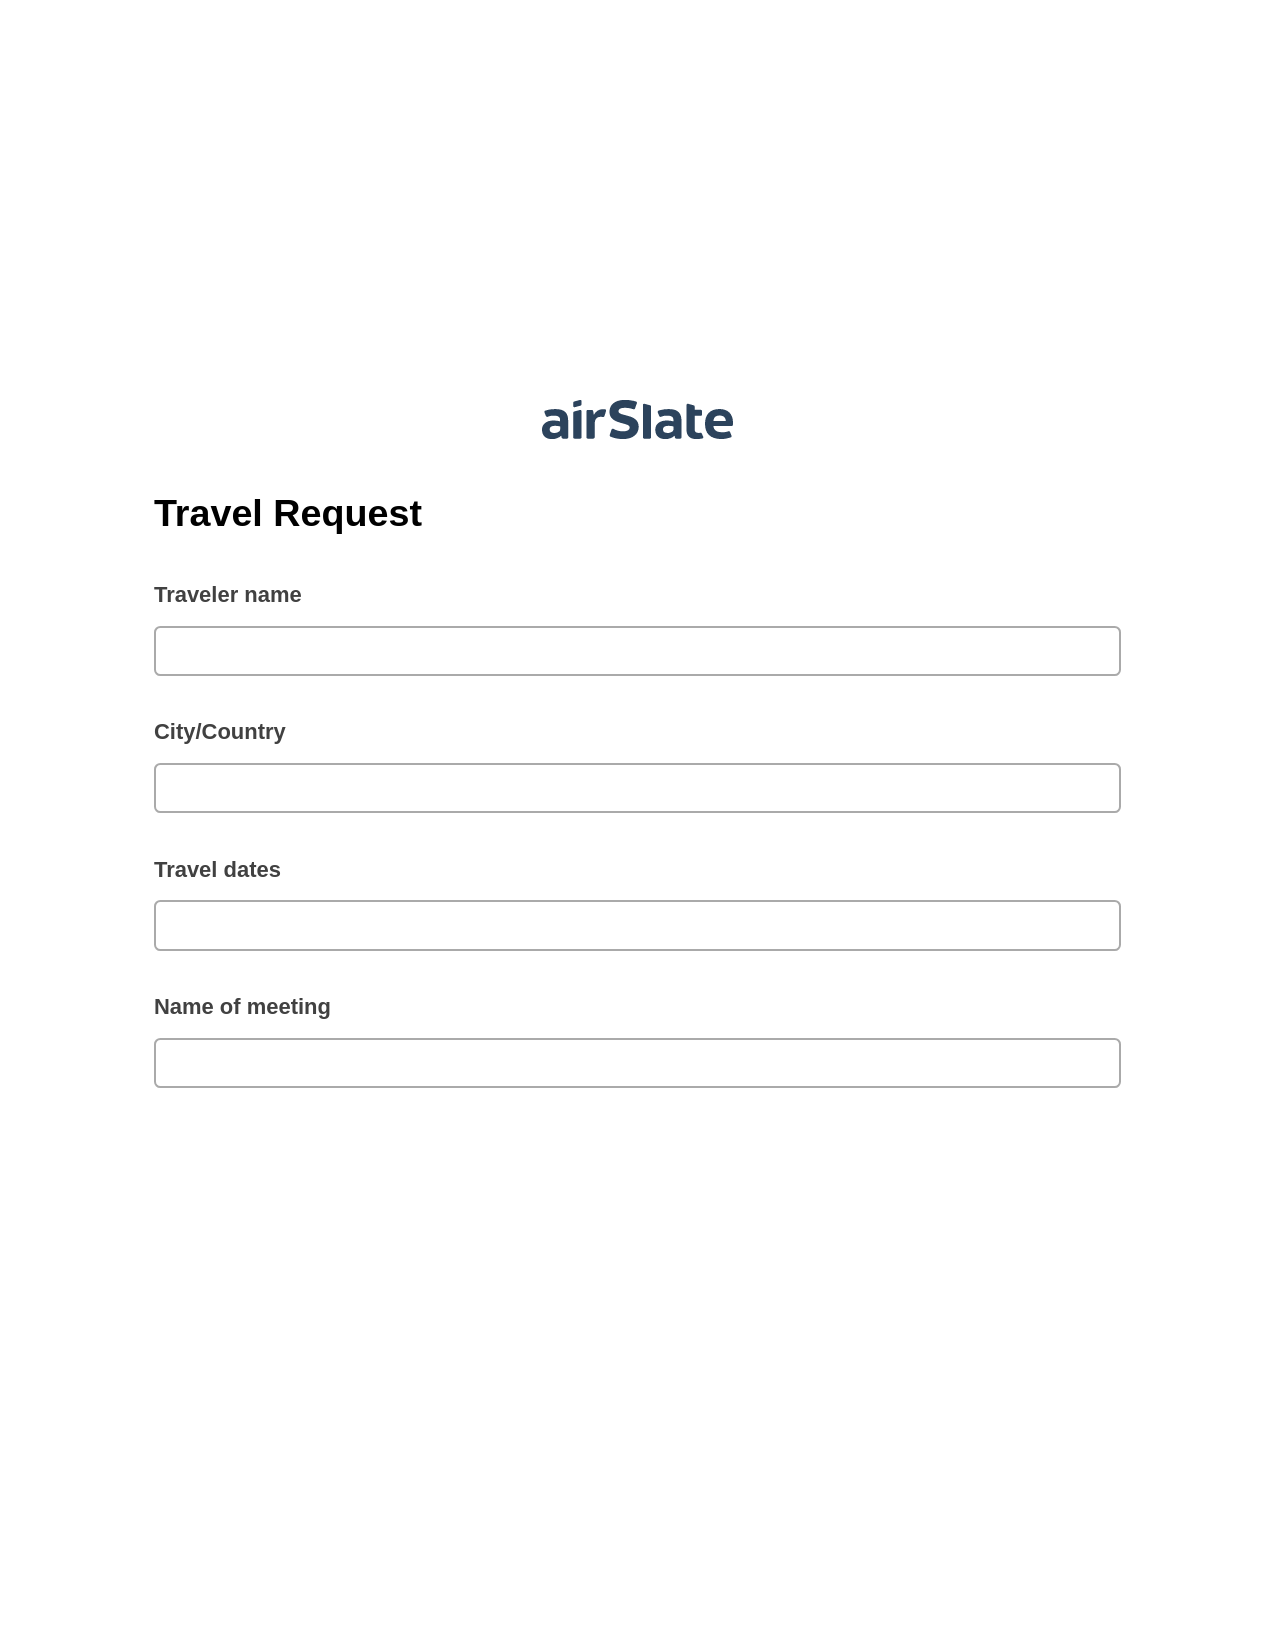 Travel Request Pre-fill from another Slate Bot, Create slate addon, Post-finish Document Bot